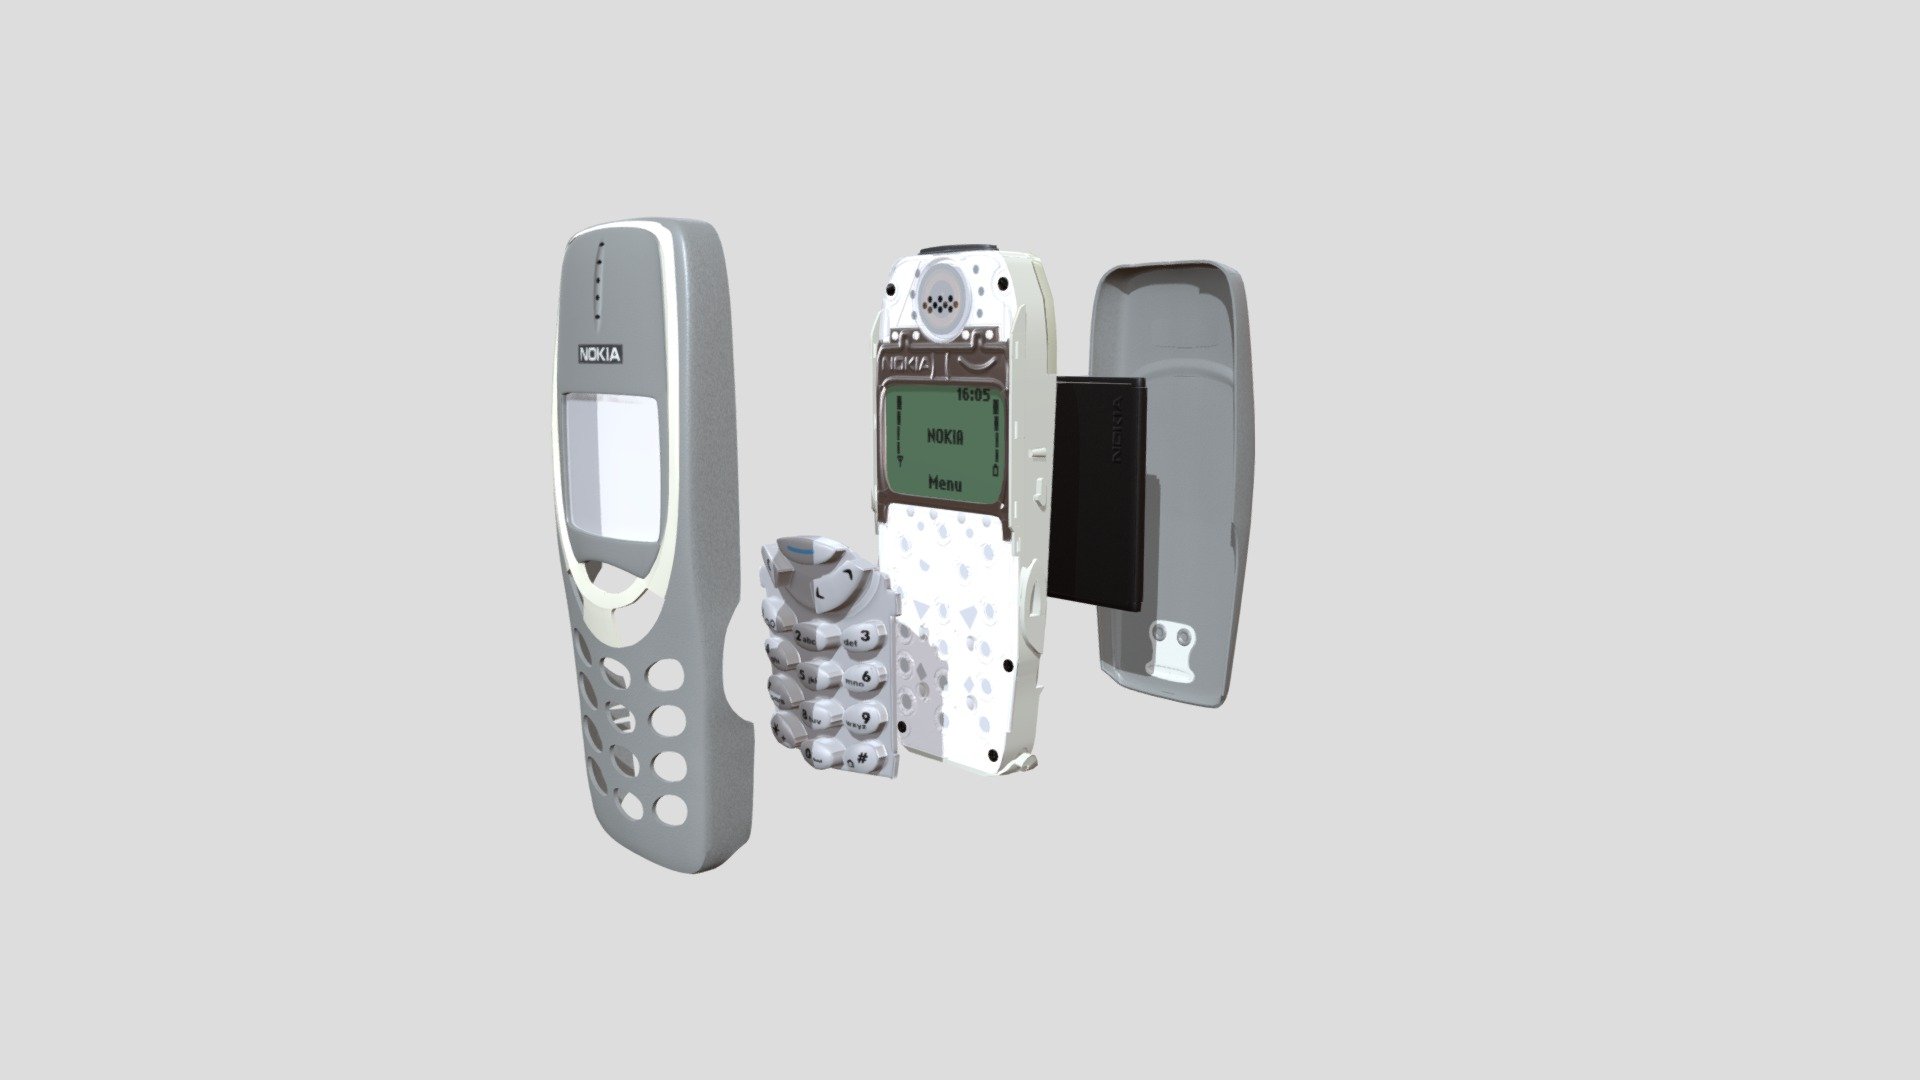 Nokia 3310 teardown

Made and textured in Blender

Textures Baked. There are alpha and transmission masks included.

Quads+Tris

Feel free to contact me if you have any questions 3d model